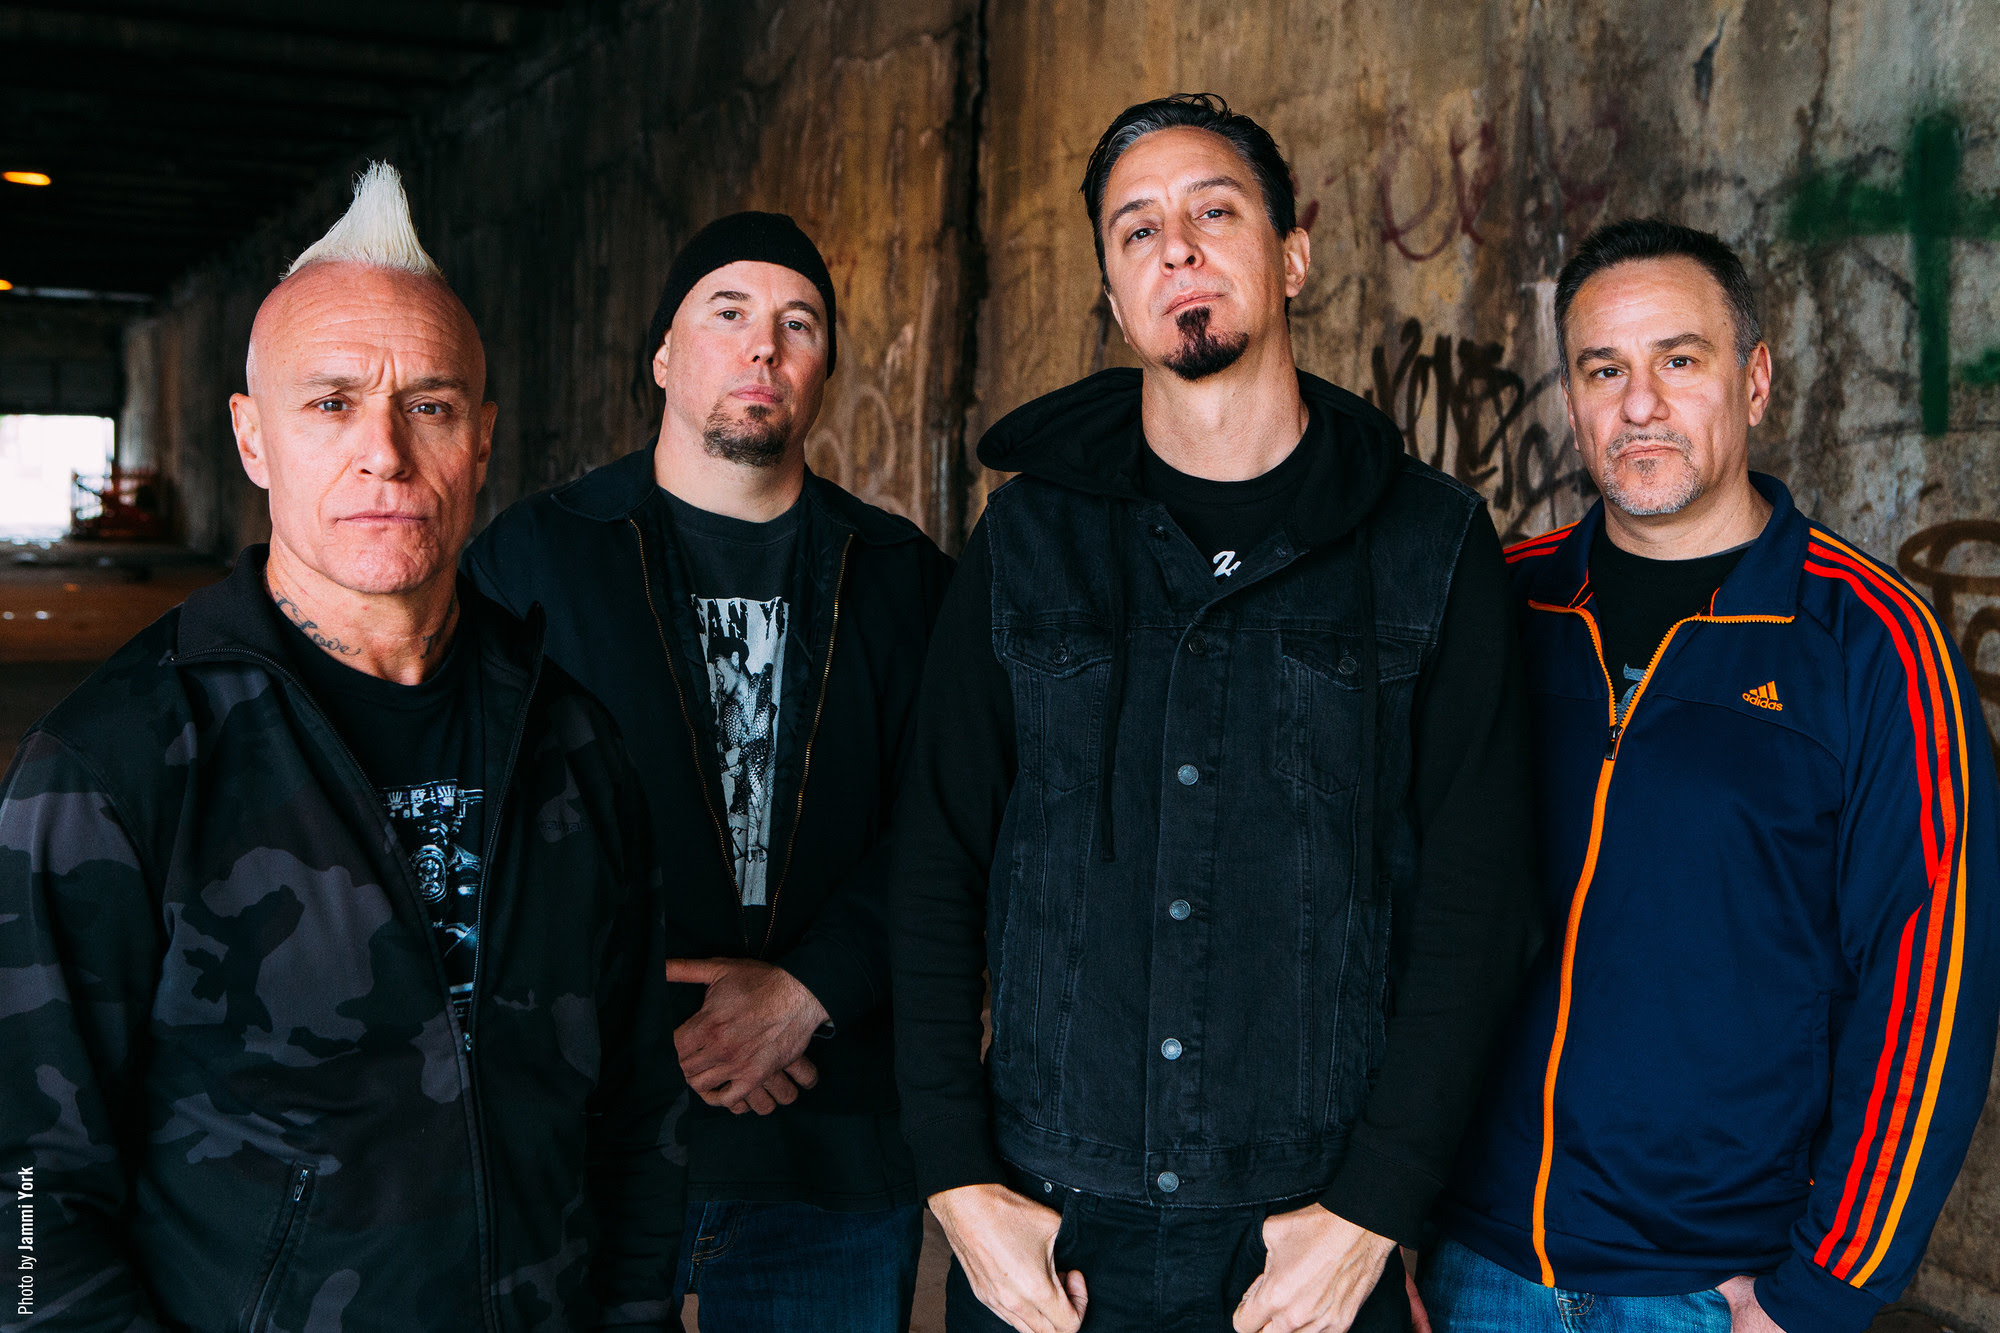 SICK OF IT ALL – ascolta “The Bland Within” tratto dalle “Quarantine Sessions”